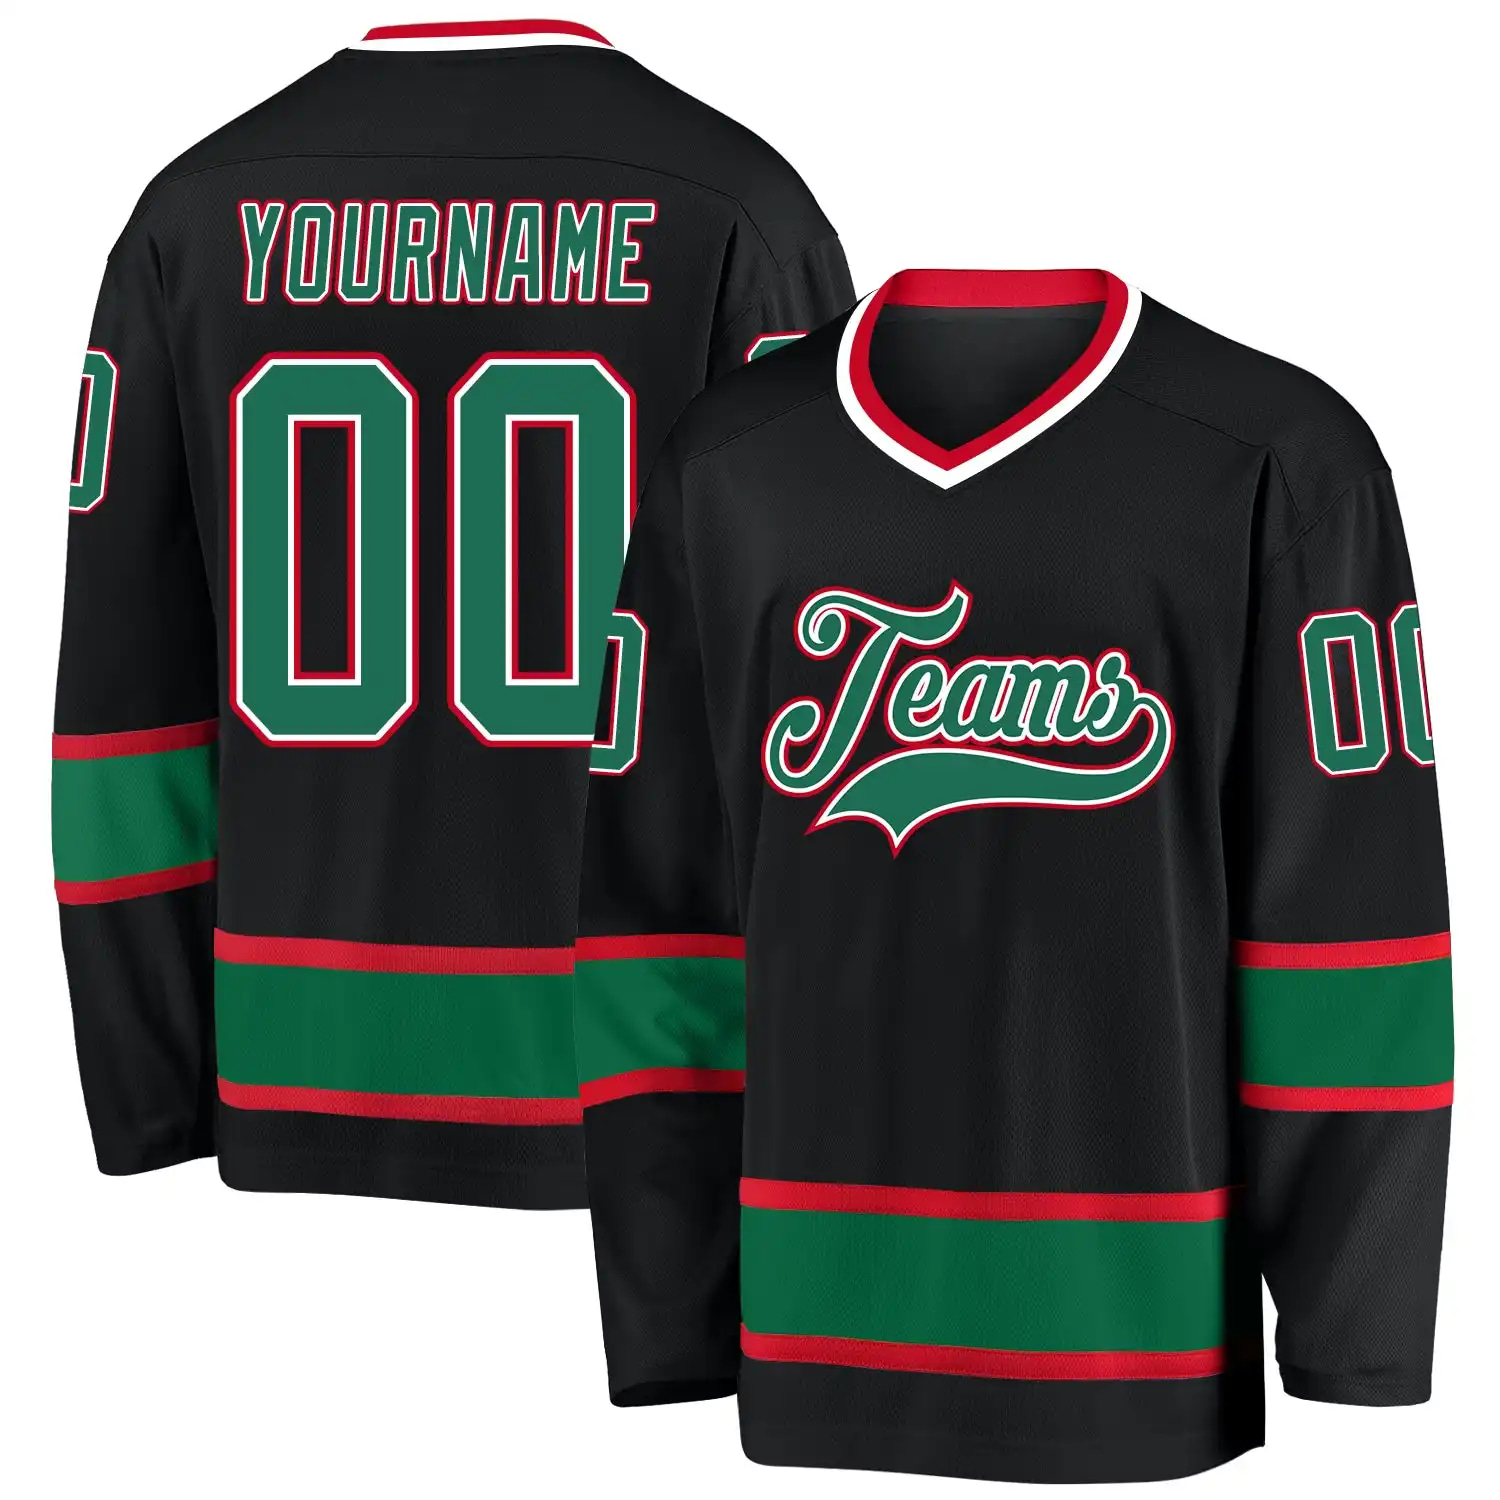 Stitched And Print Black Kelly Green-red Hockey Jersey Custom